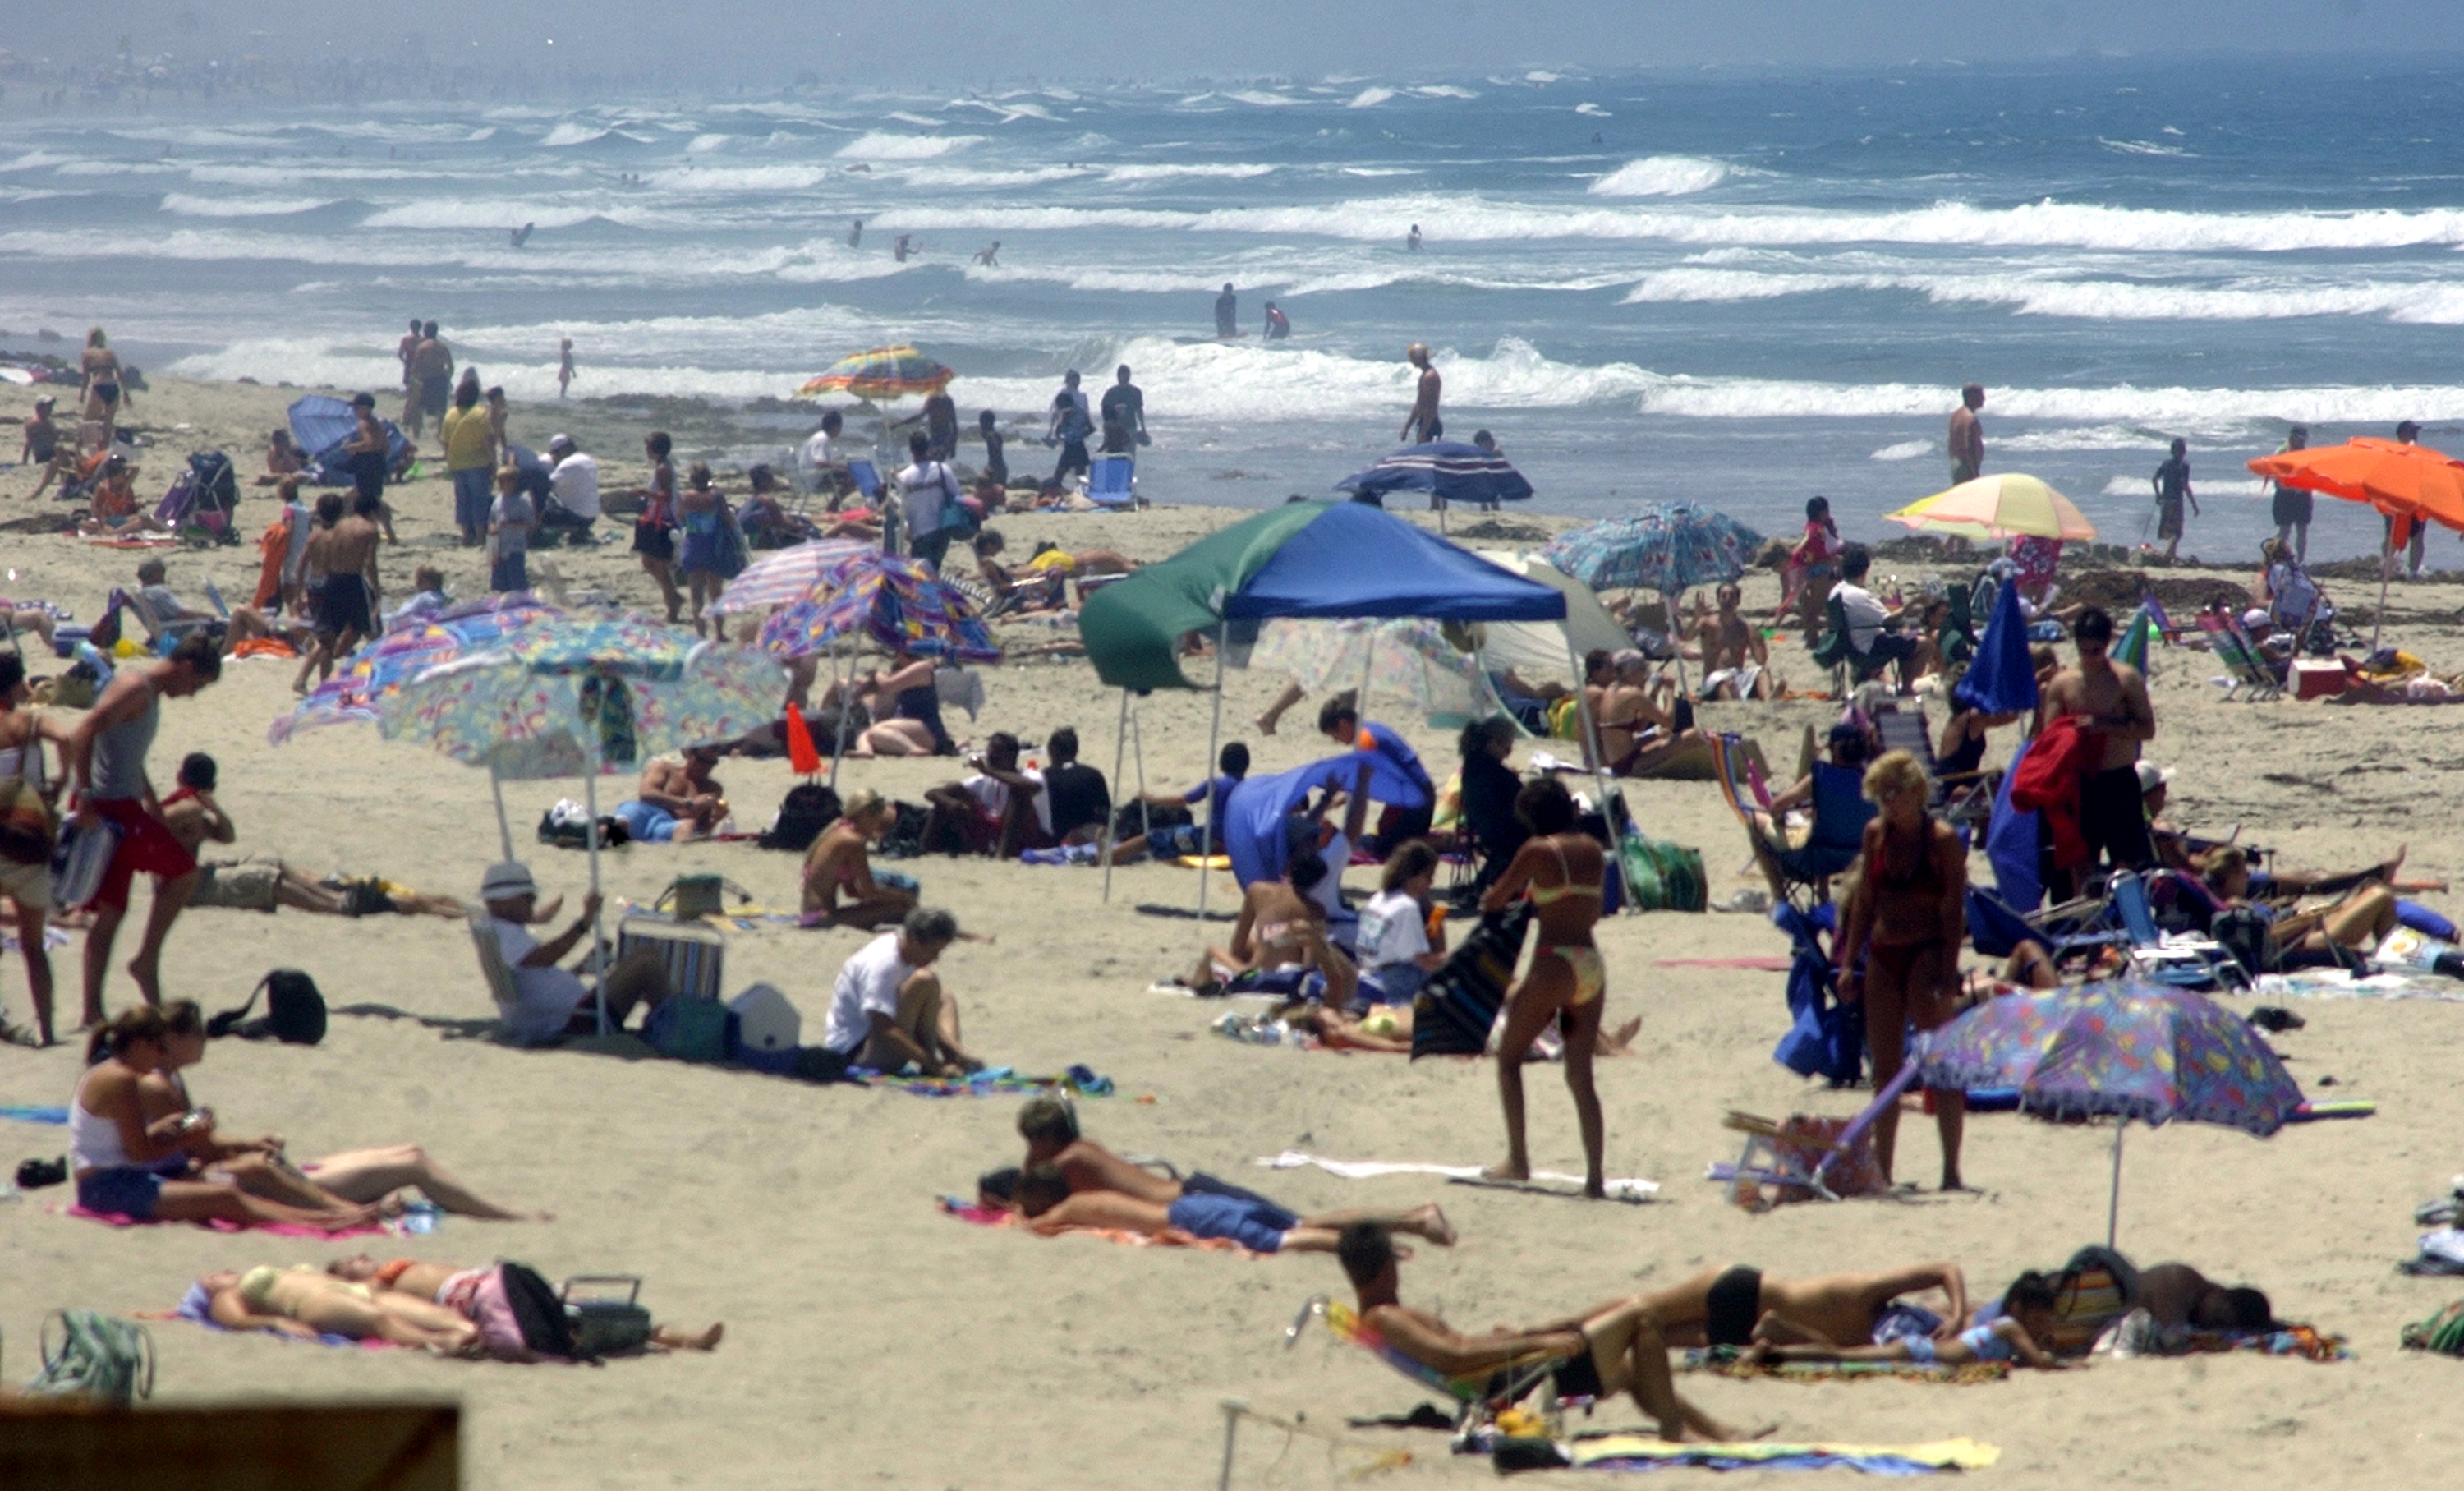 Thousands Head To The Beaches For 4th Of July Weekend